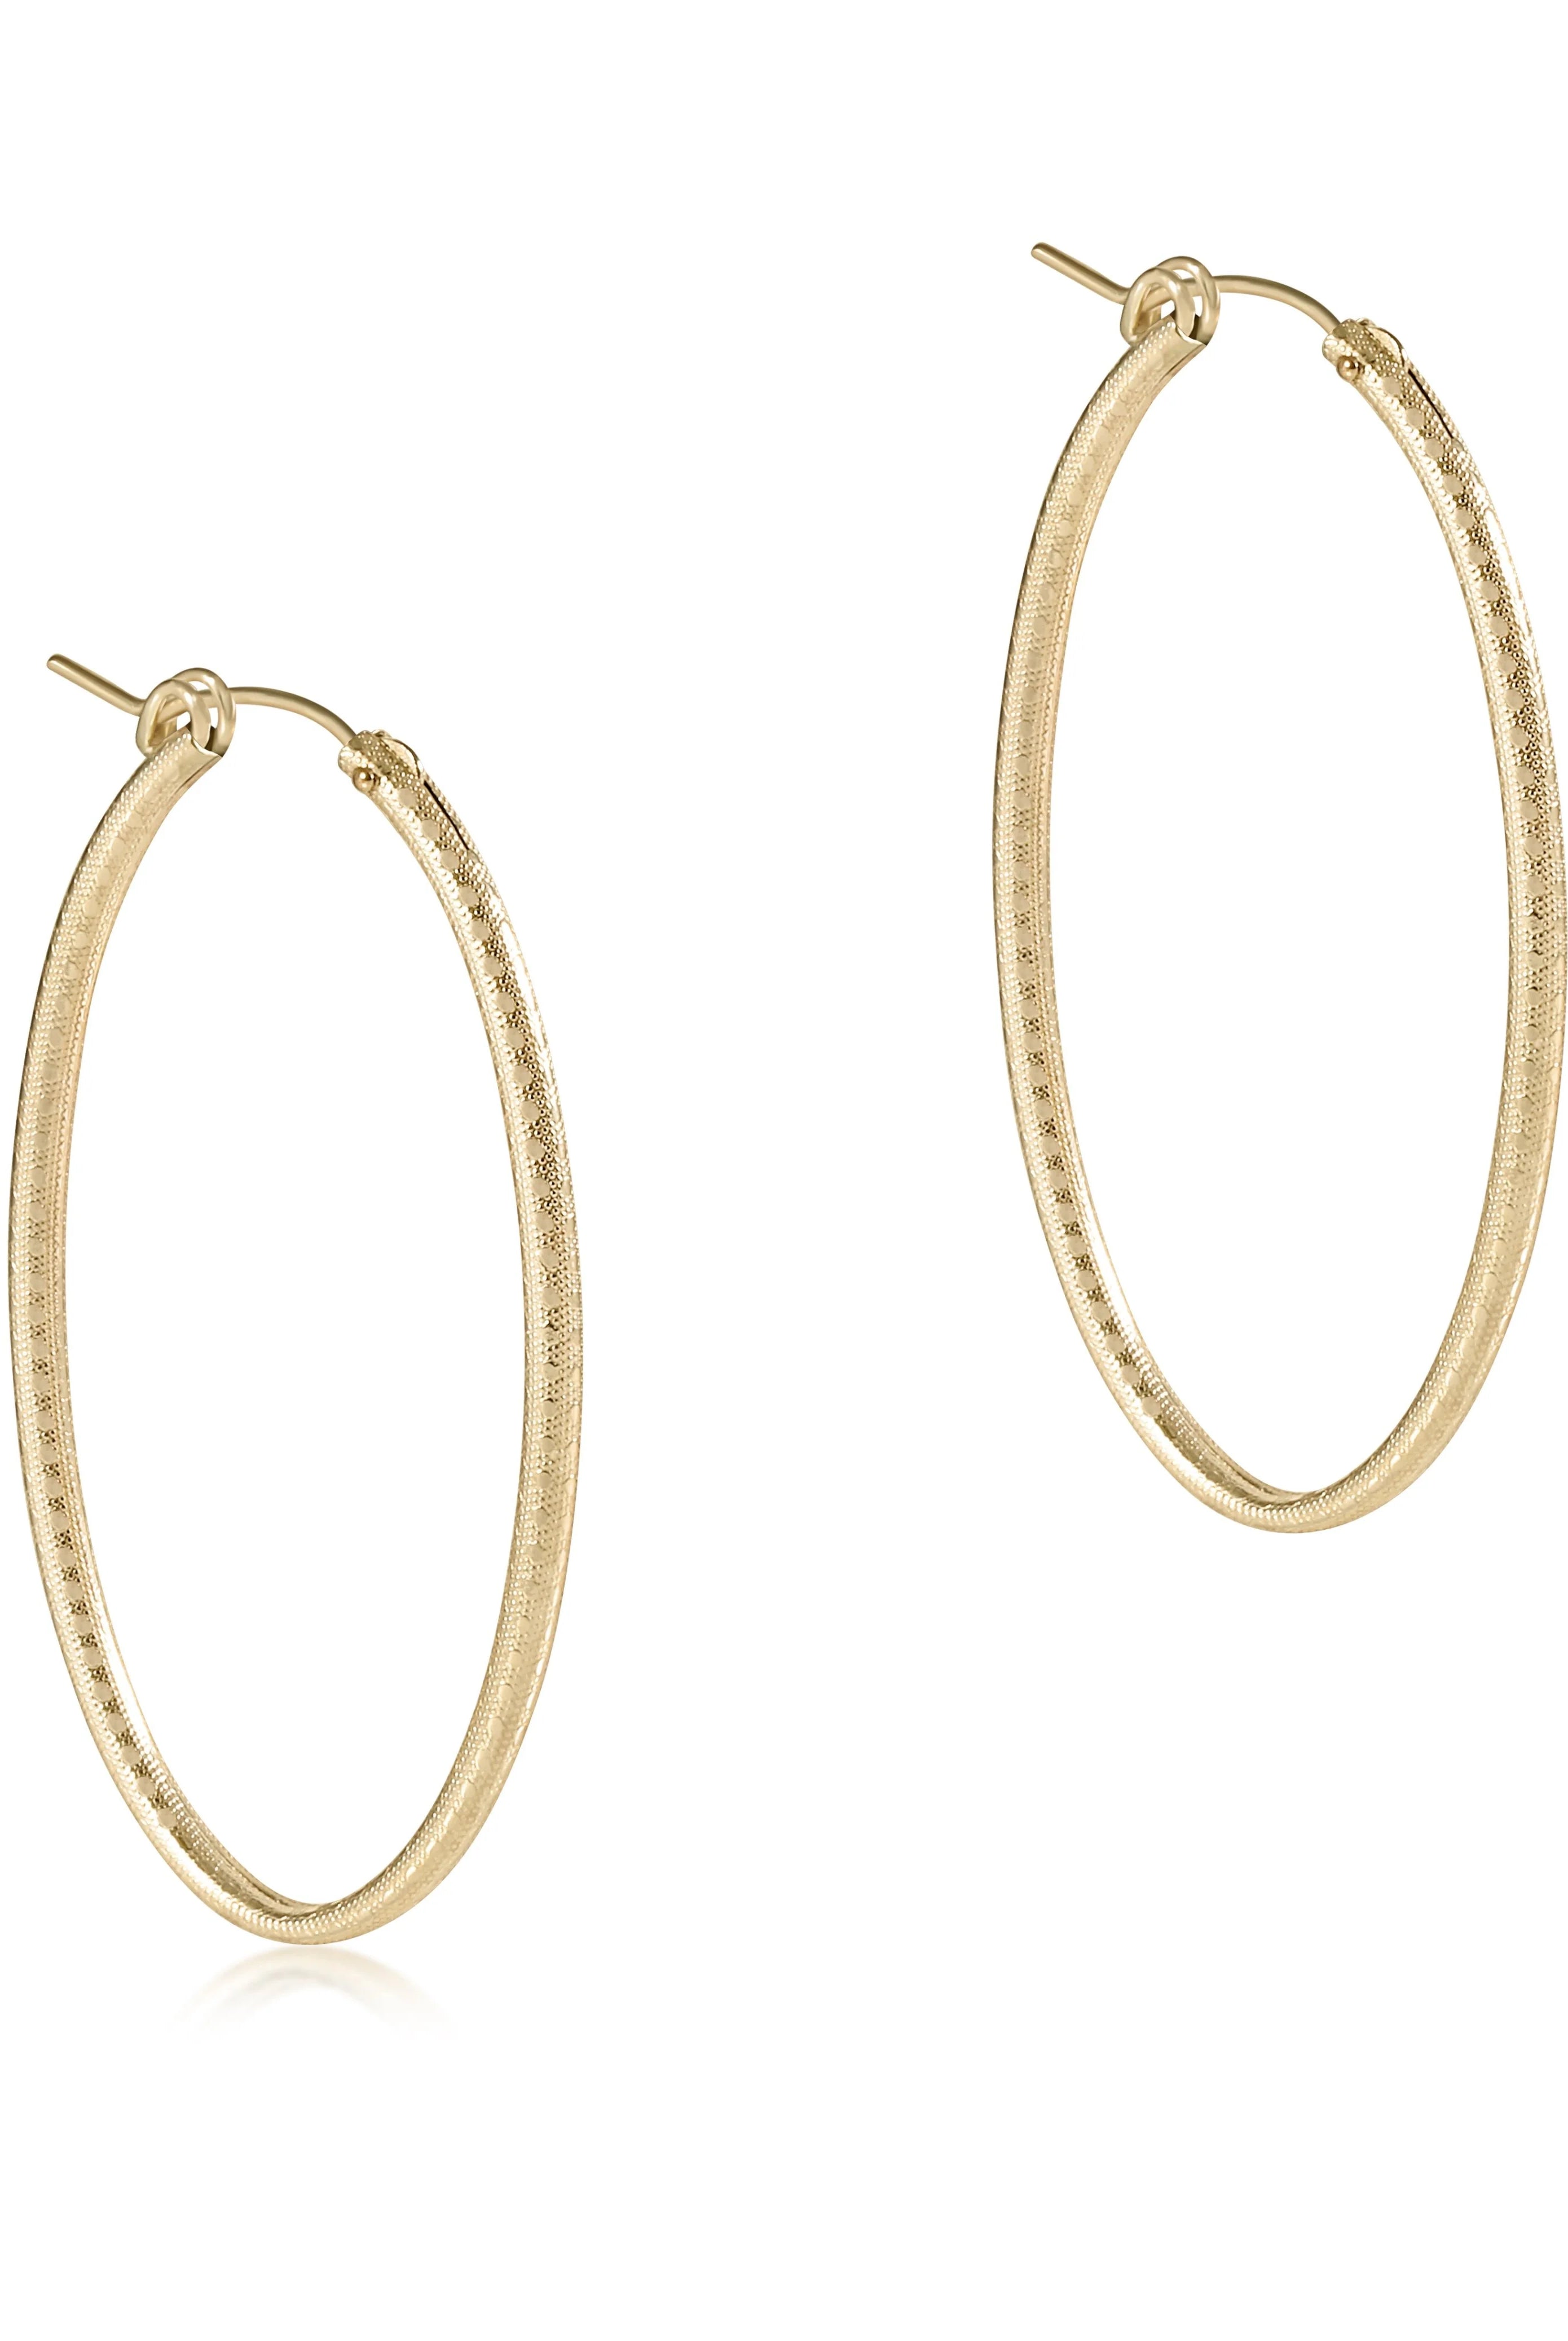 Oval Gold 2" Hoop Textured Earring-Earrings-eNewton-The Lovely Closet, Women's Fashion Boutique in Alexandria, KY